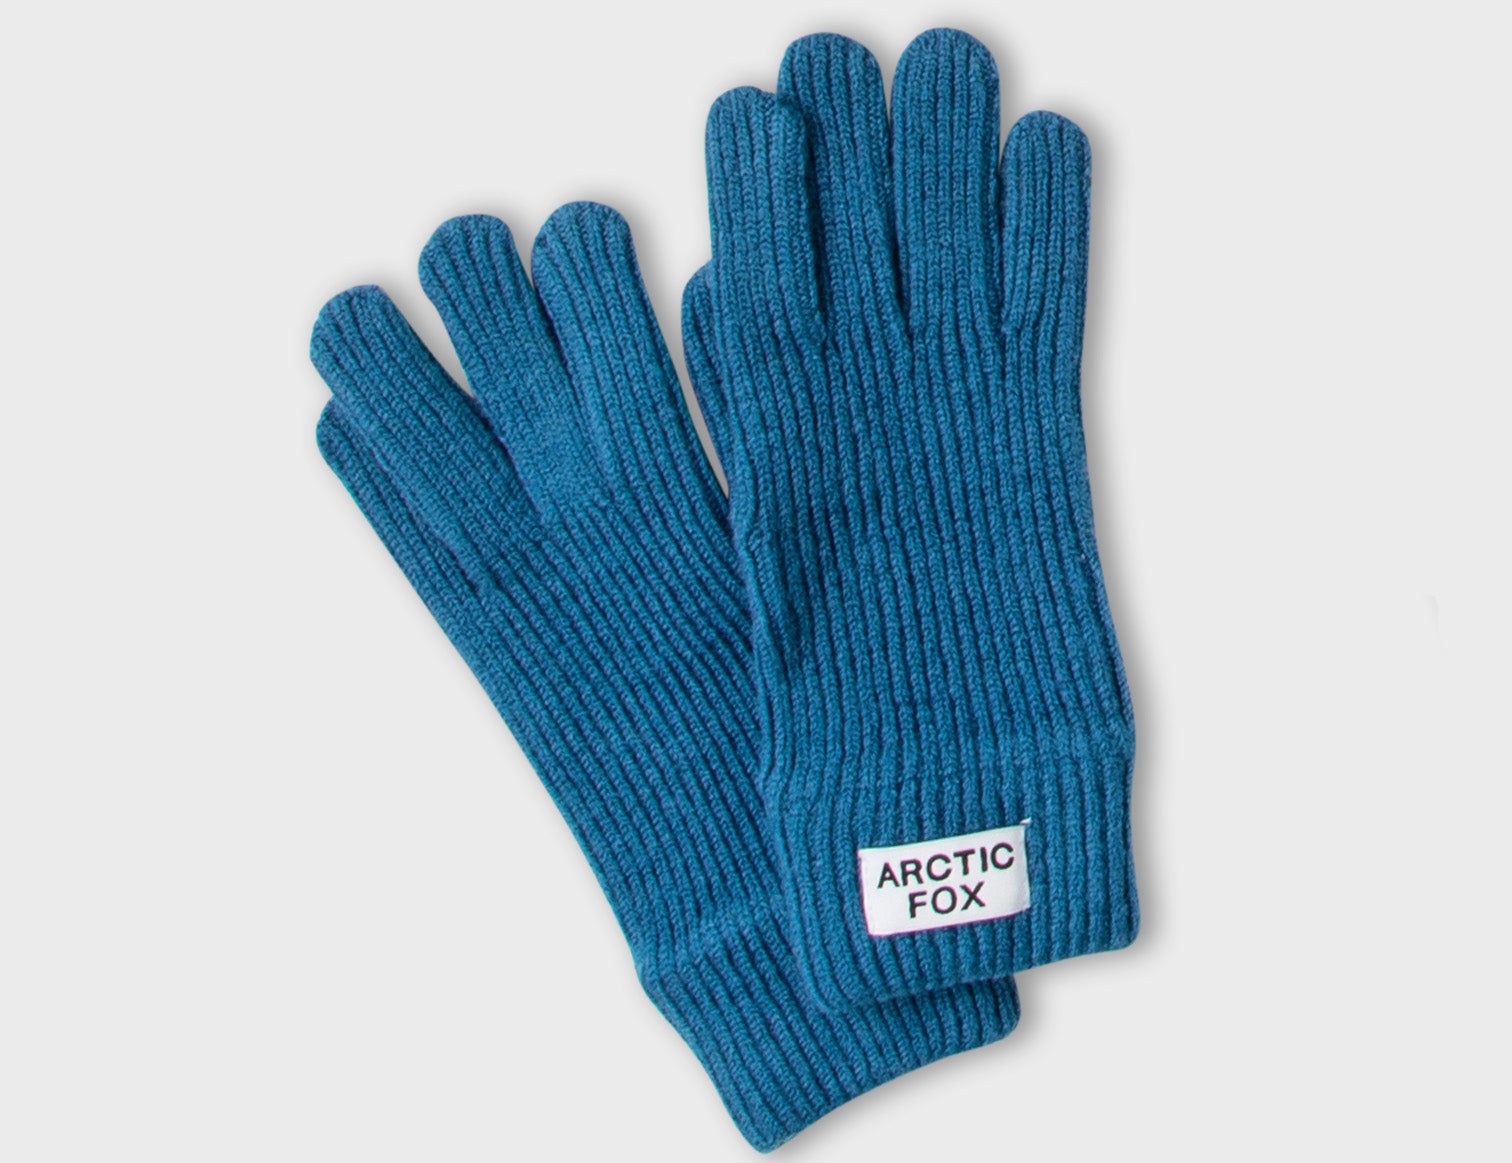 The Recycled Bottle Gloves - AW22